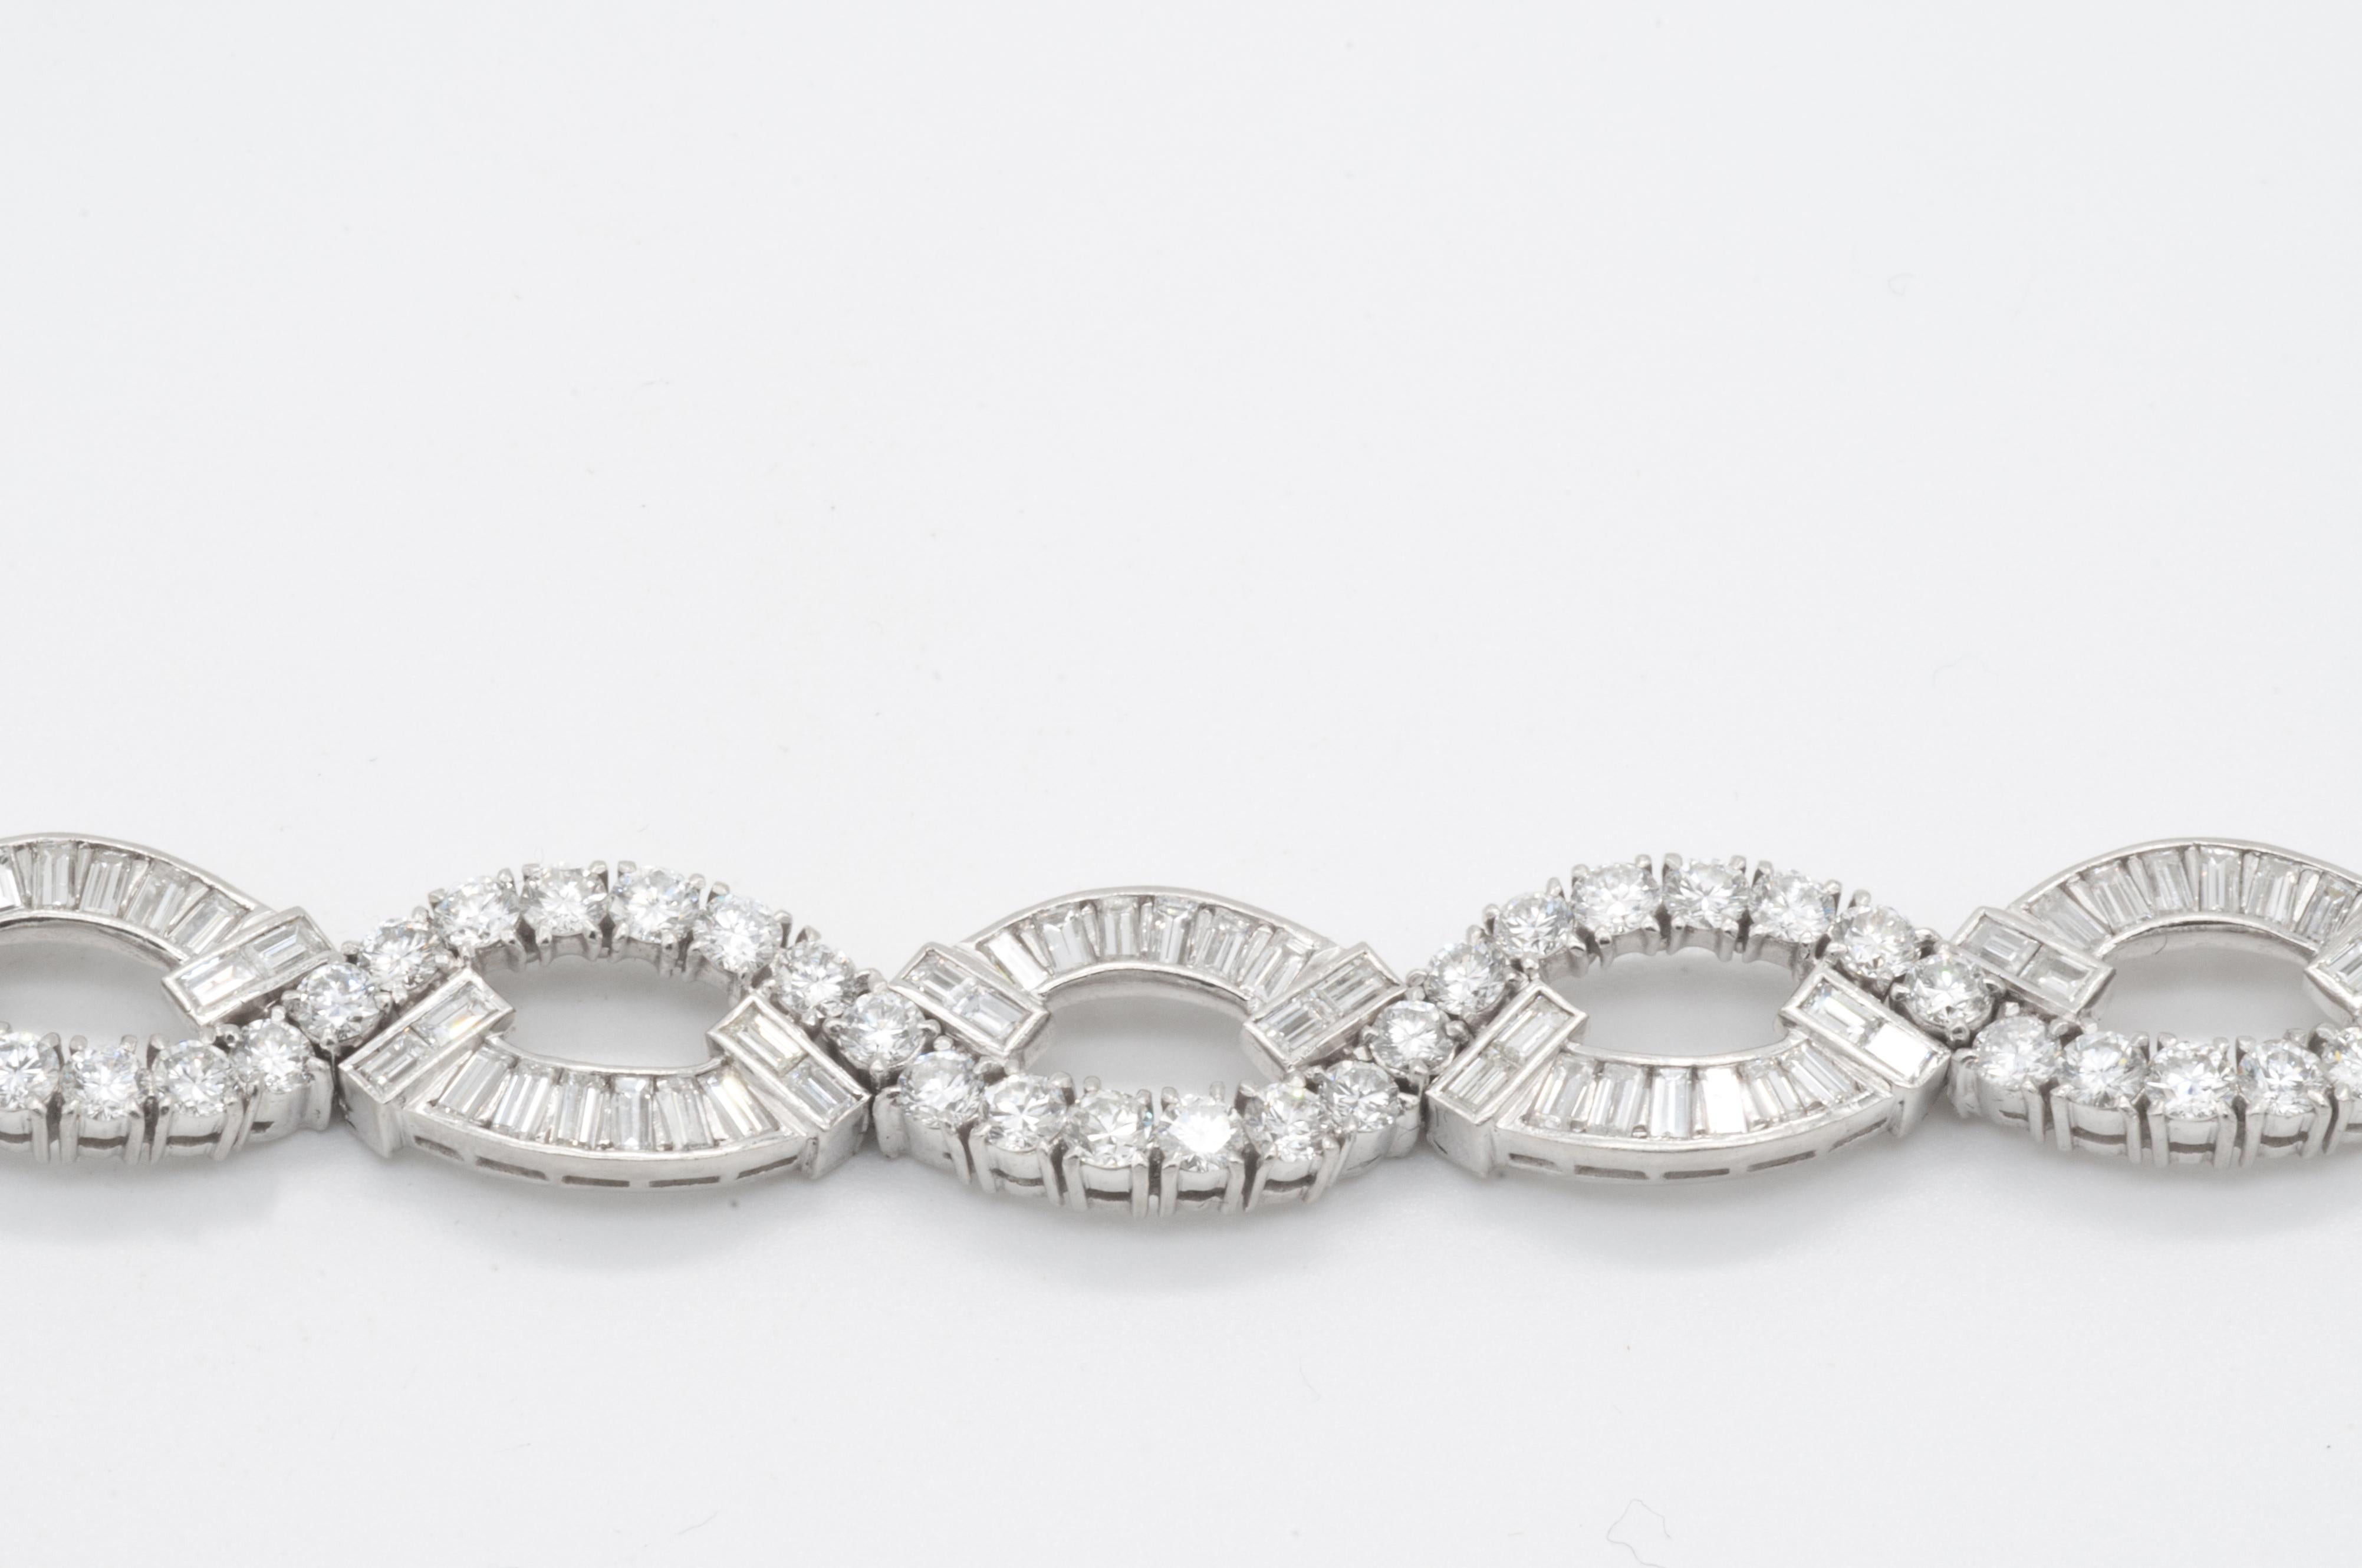 Platinum and Diamond Bracelet In Good Condition For Sale In Lewisburg, WV